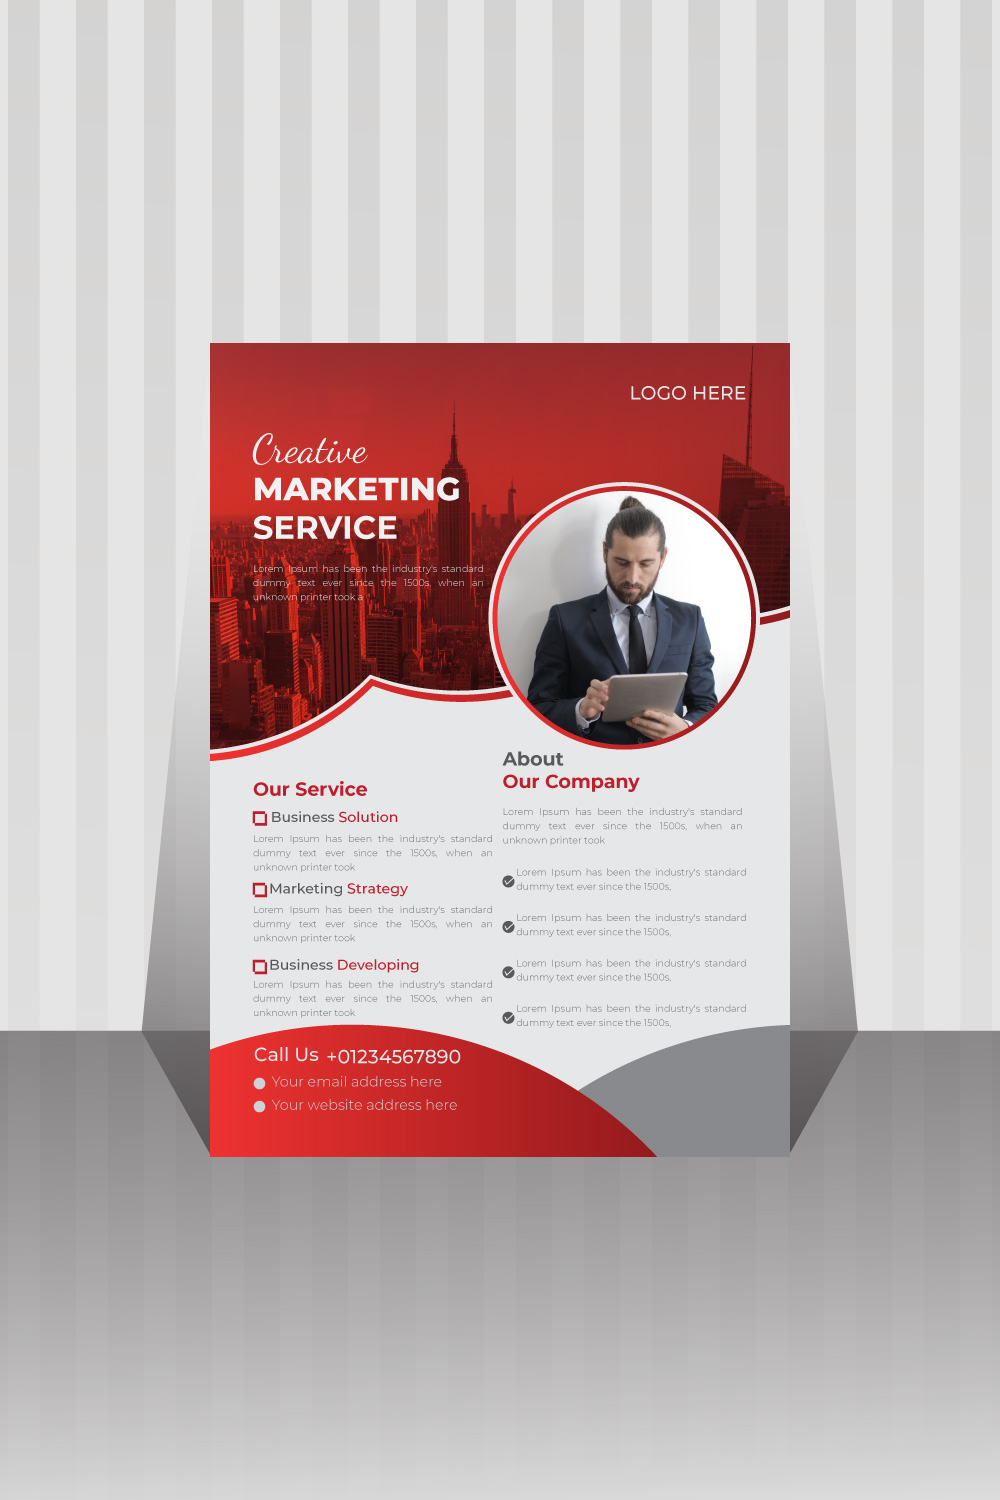 Image of a corporate business flyer with a colorful design